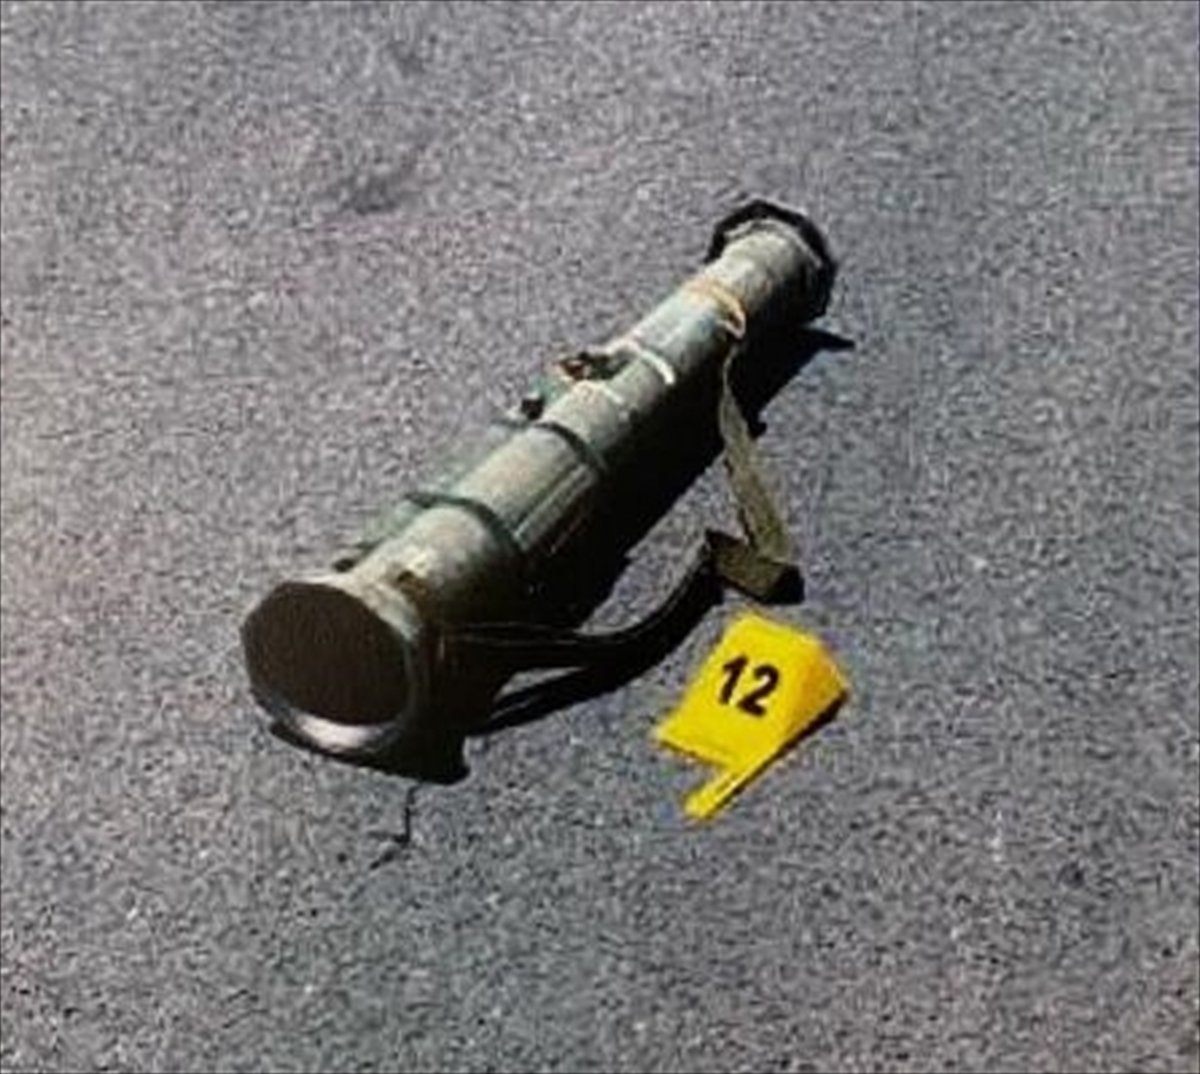 Swedish-made AT-4 is used in PKK attacks in Turkey #3